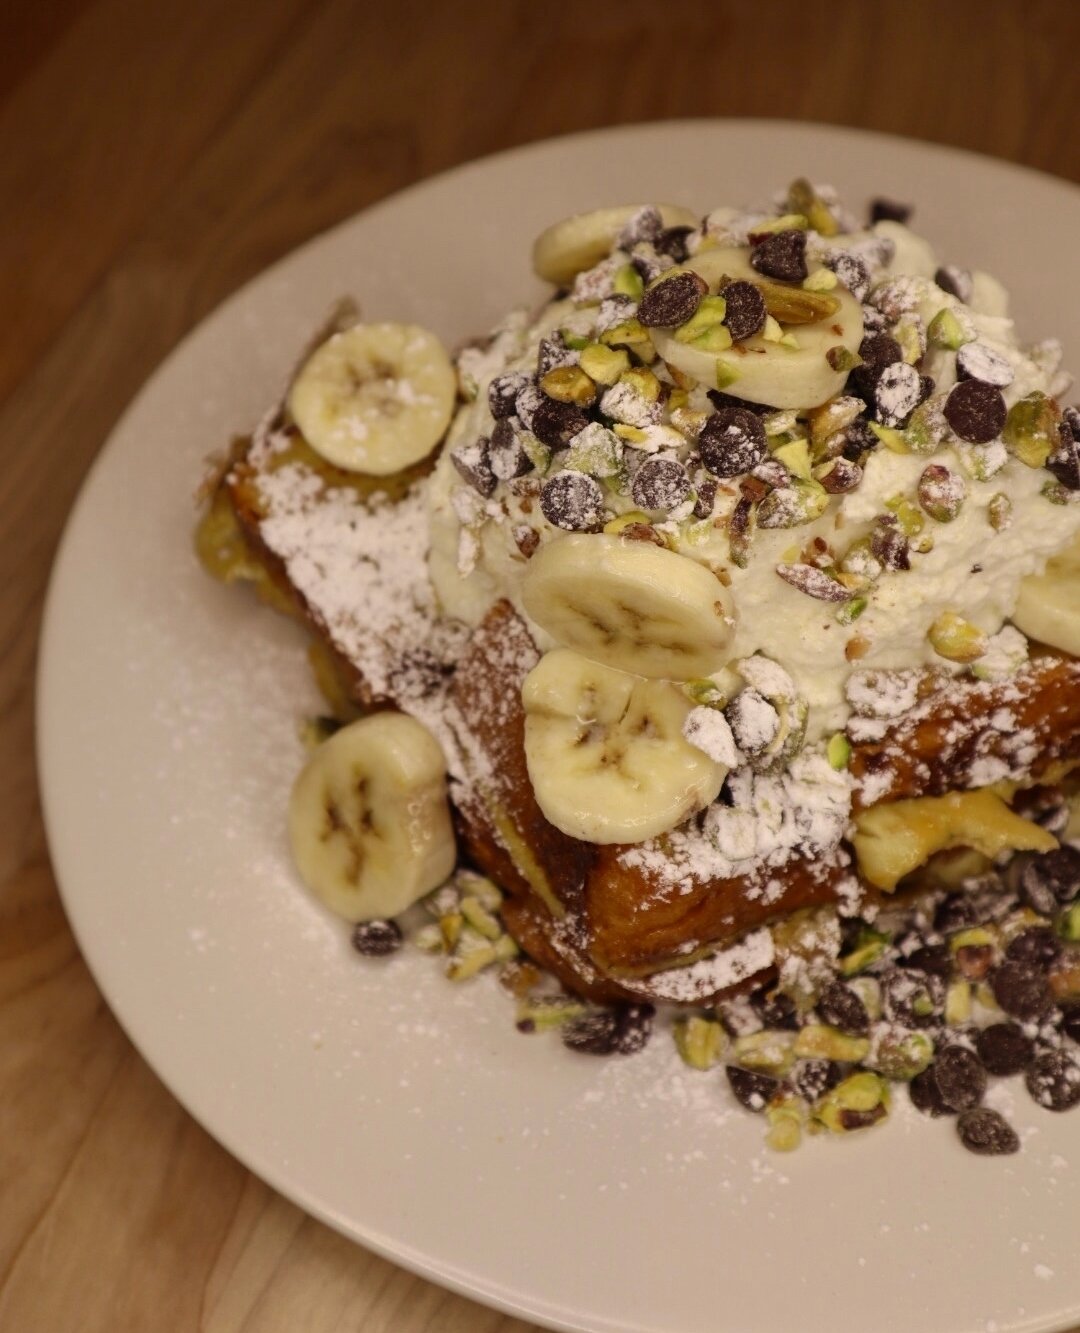 Happy Friday! Treat yourself to some Cannoli French Toast 😋⁠
-⁠
-⁠
🔗cafelifthaddonfield.com to place a takeout / delivery order⁠
⁠
&bull;  Breakfast/ Lunch/ Brunch All Day⁠
&bull;  Specialty Coffee Beverages⁠
&bull;  Pick Up &amp; Delivery Availabl